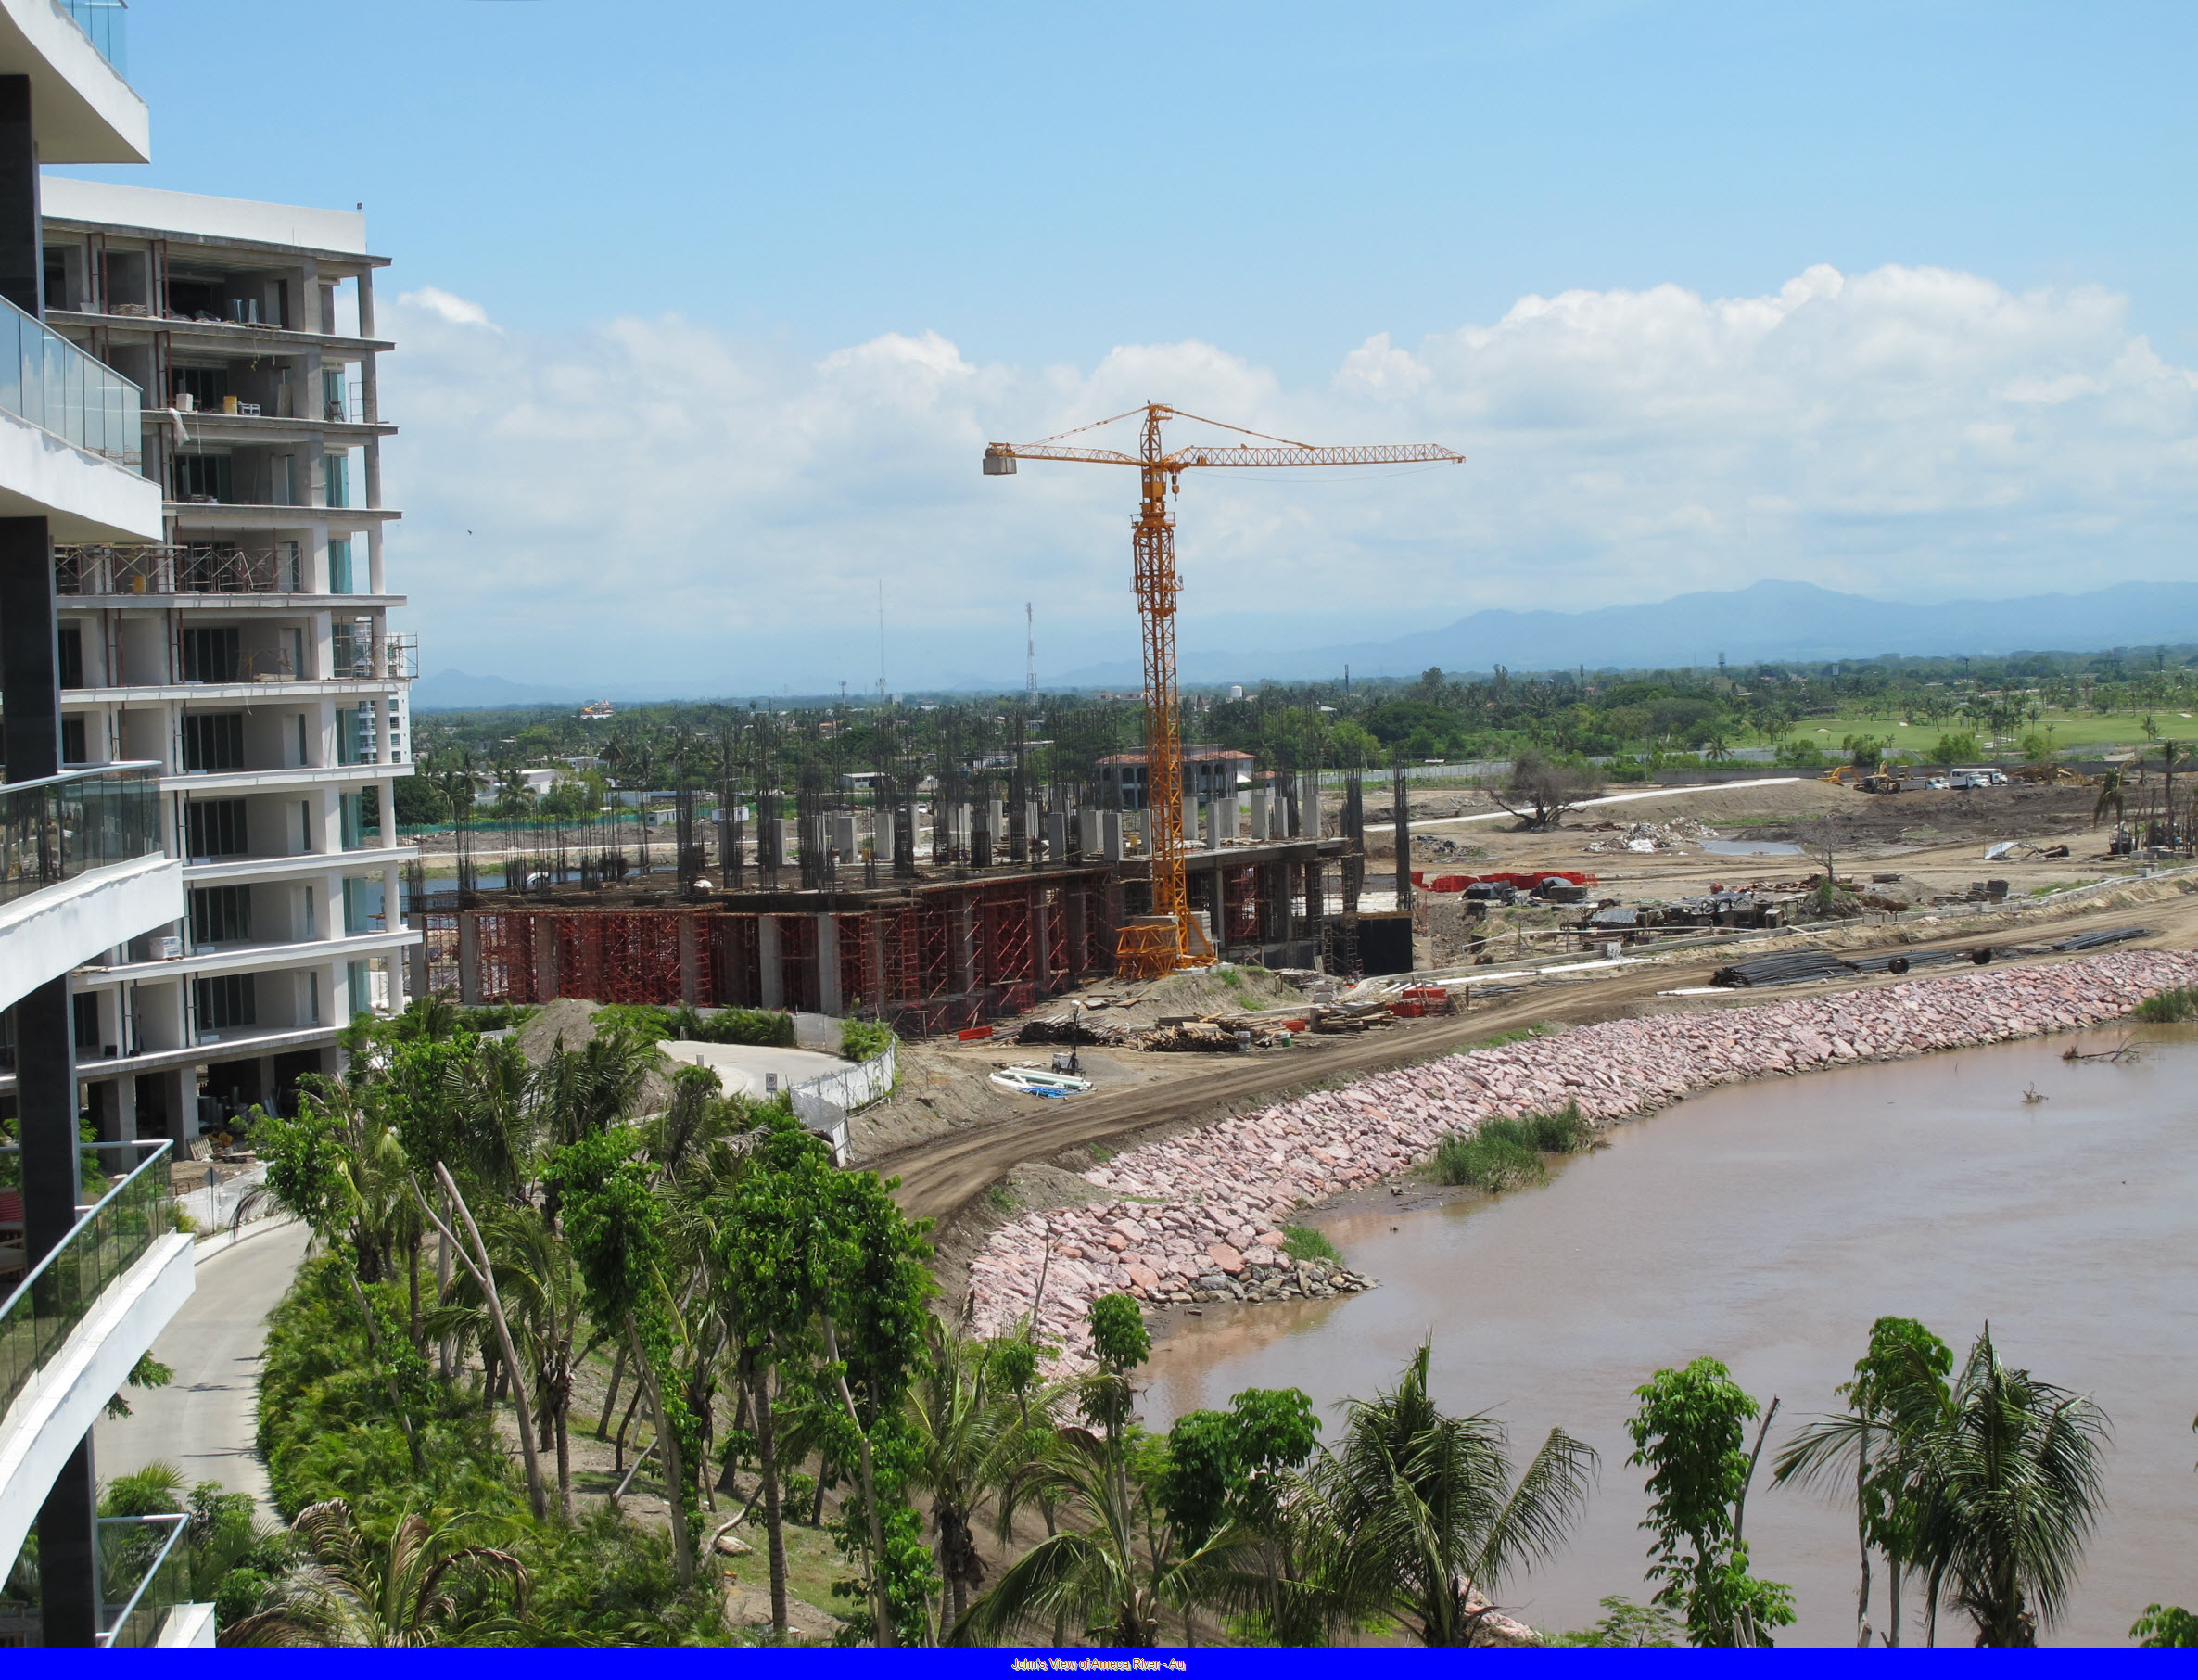 Ameca River and New Luxxe Construction Aug 8 2010